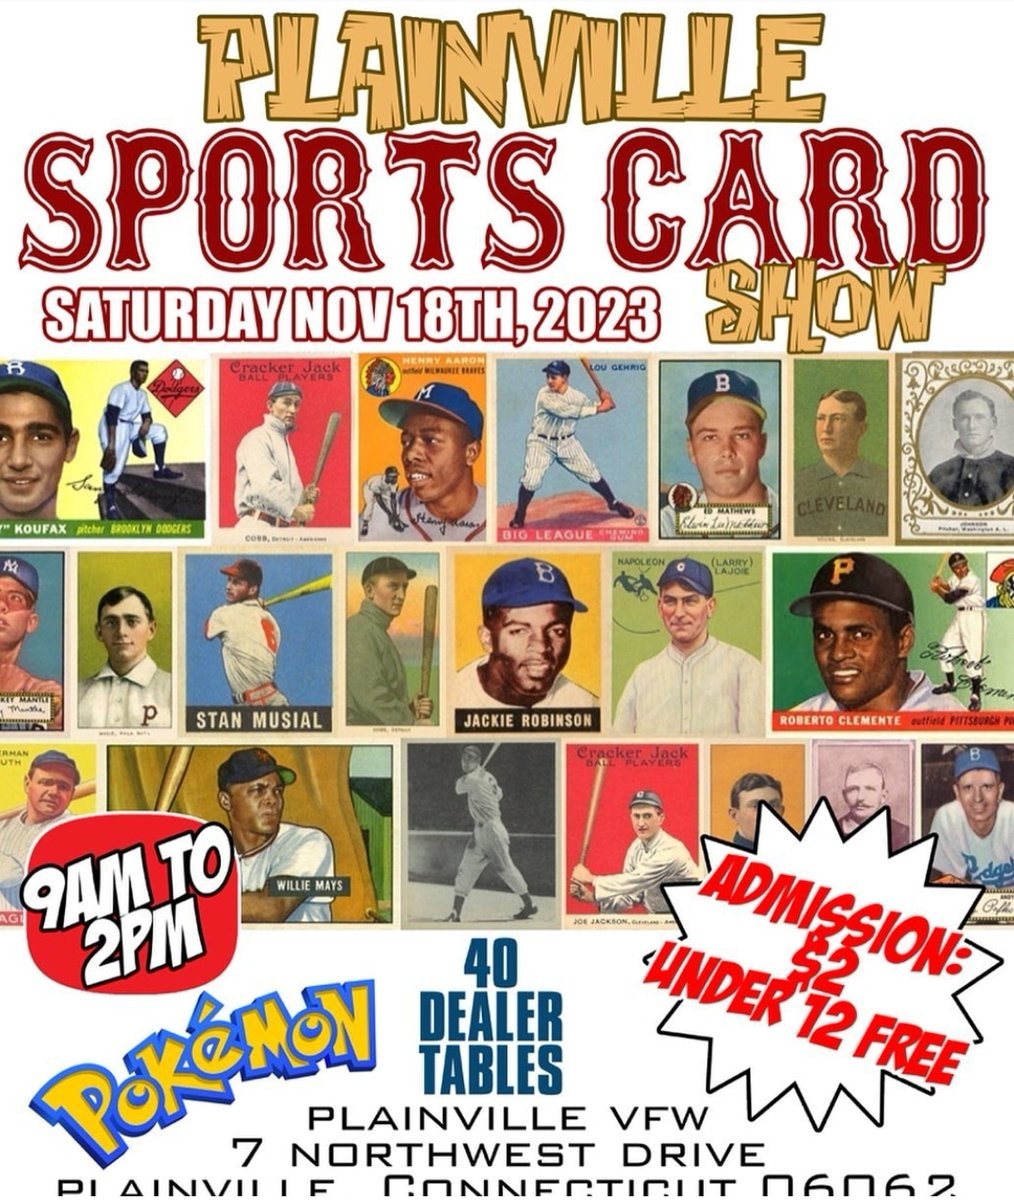 This Saturday! I will be set up in Plainville CT!

#thehobby #baseballcards #plainvillect